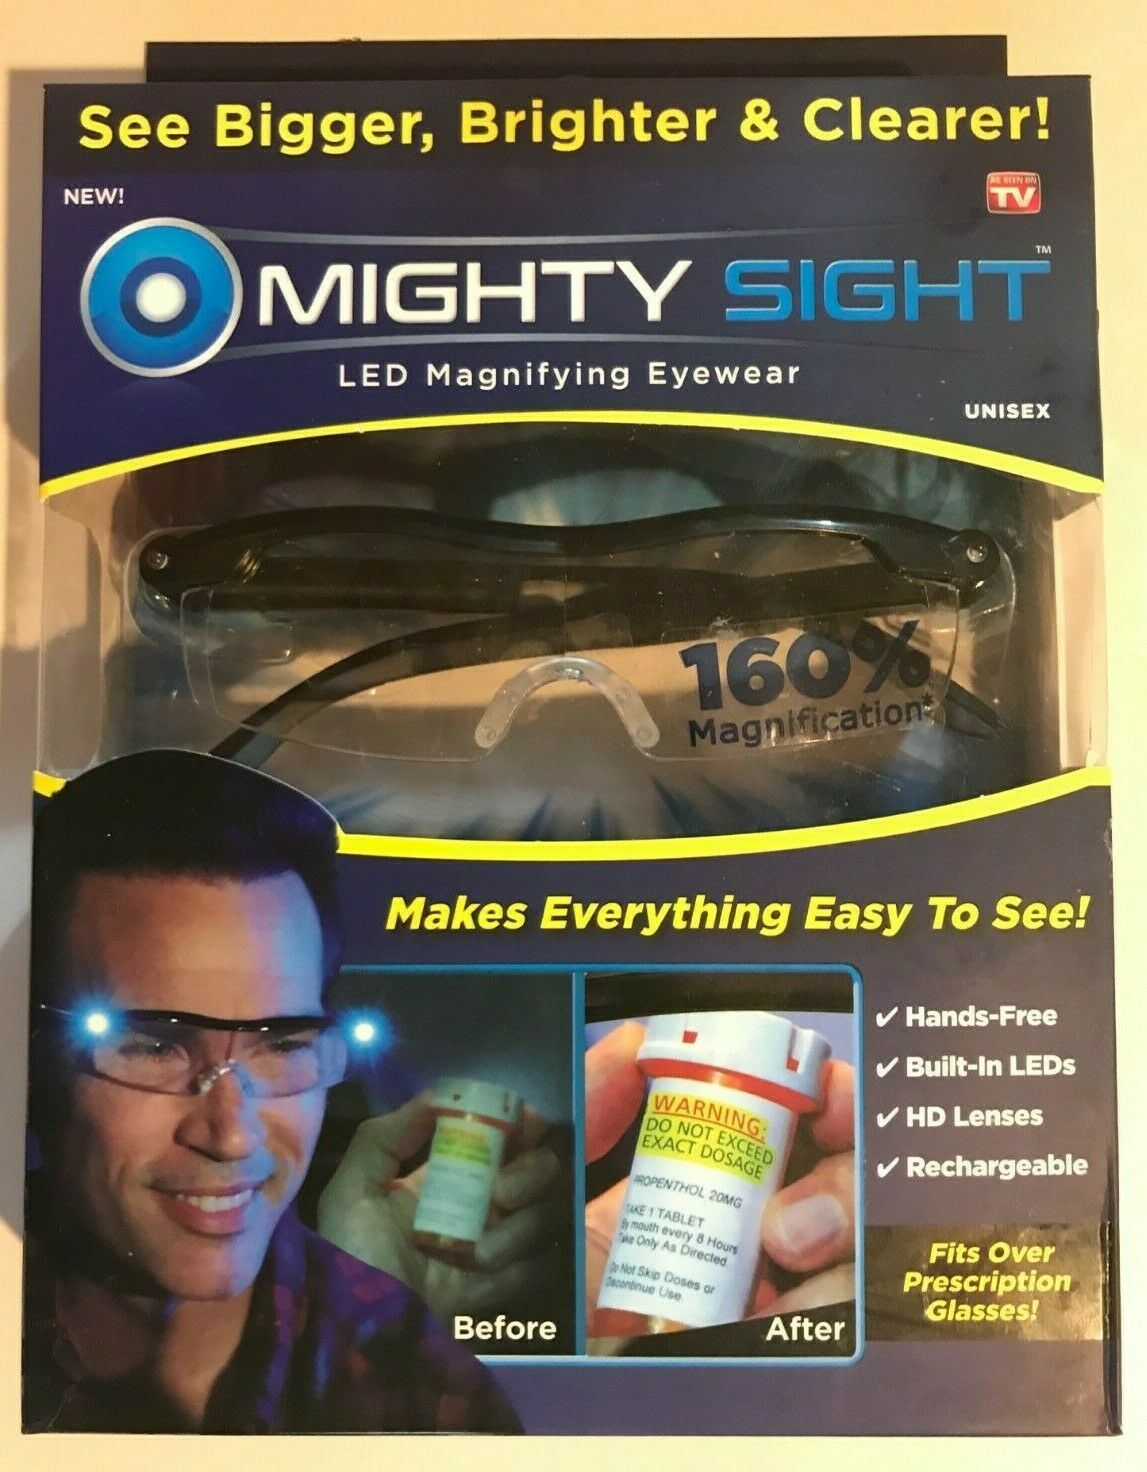 Mighty Sight Led Magnifying Eyewear Glasses Bigger Brighter Clear As Seen On Tv